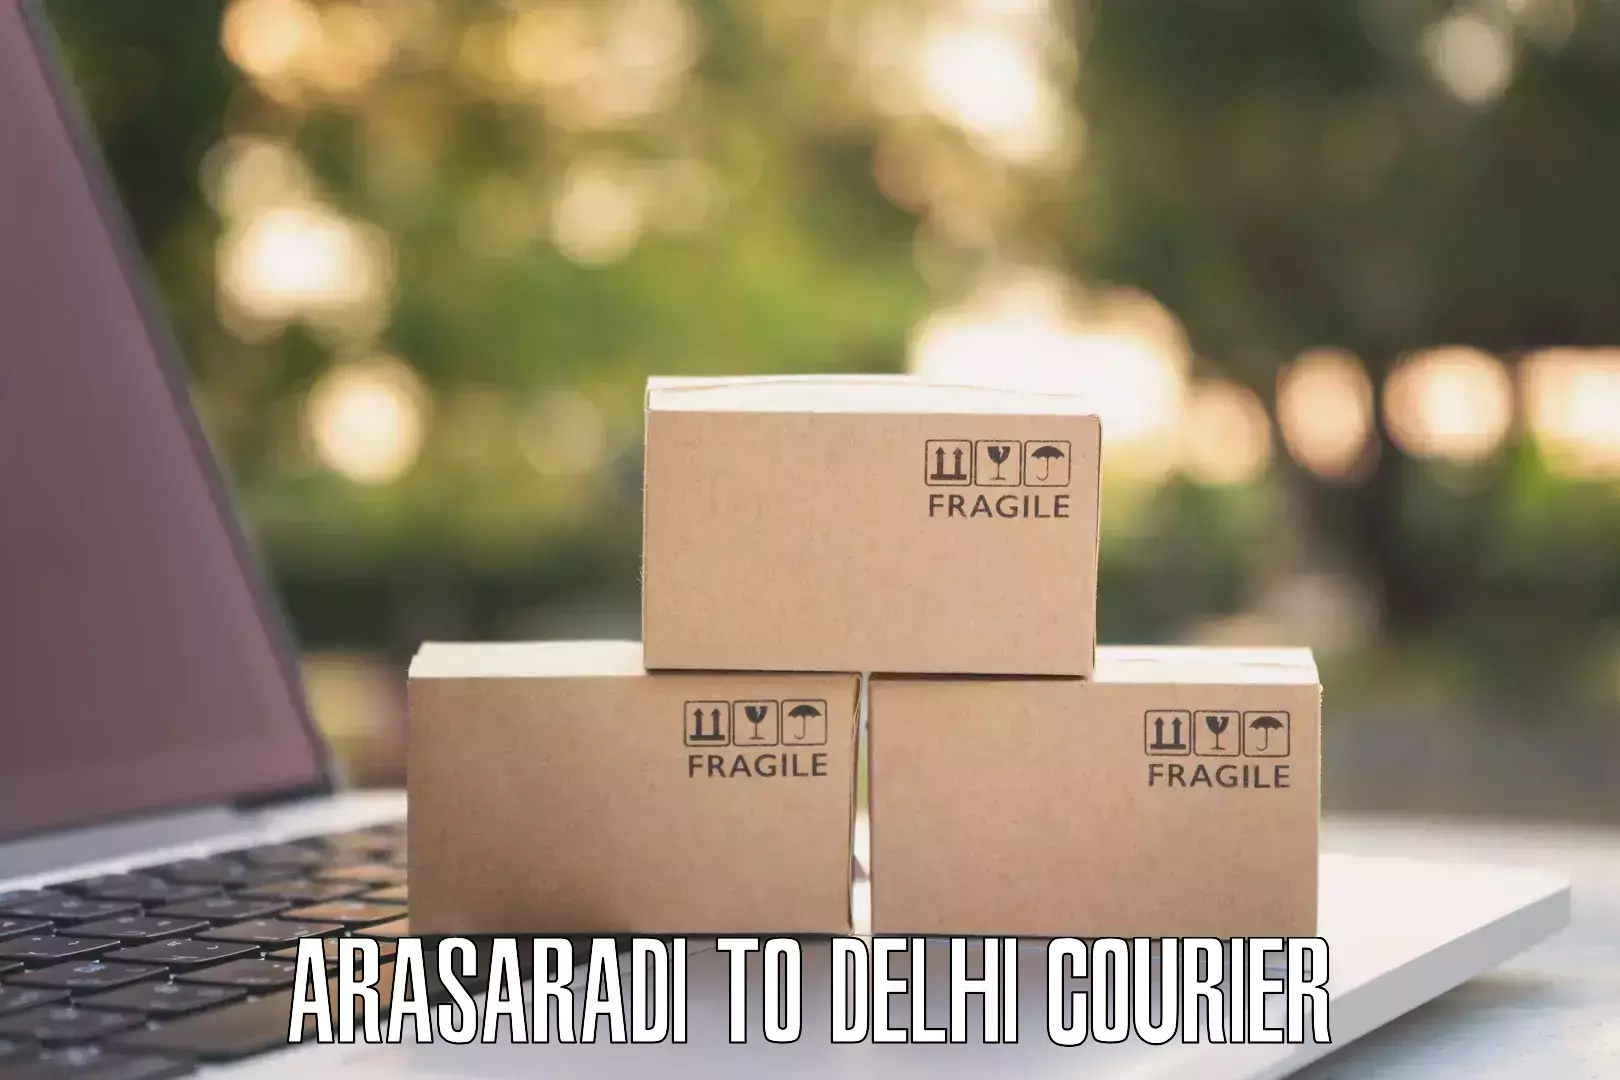 Easy access courier services Arasaradi to University of Delhi